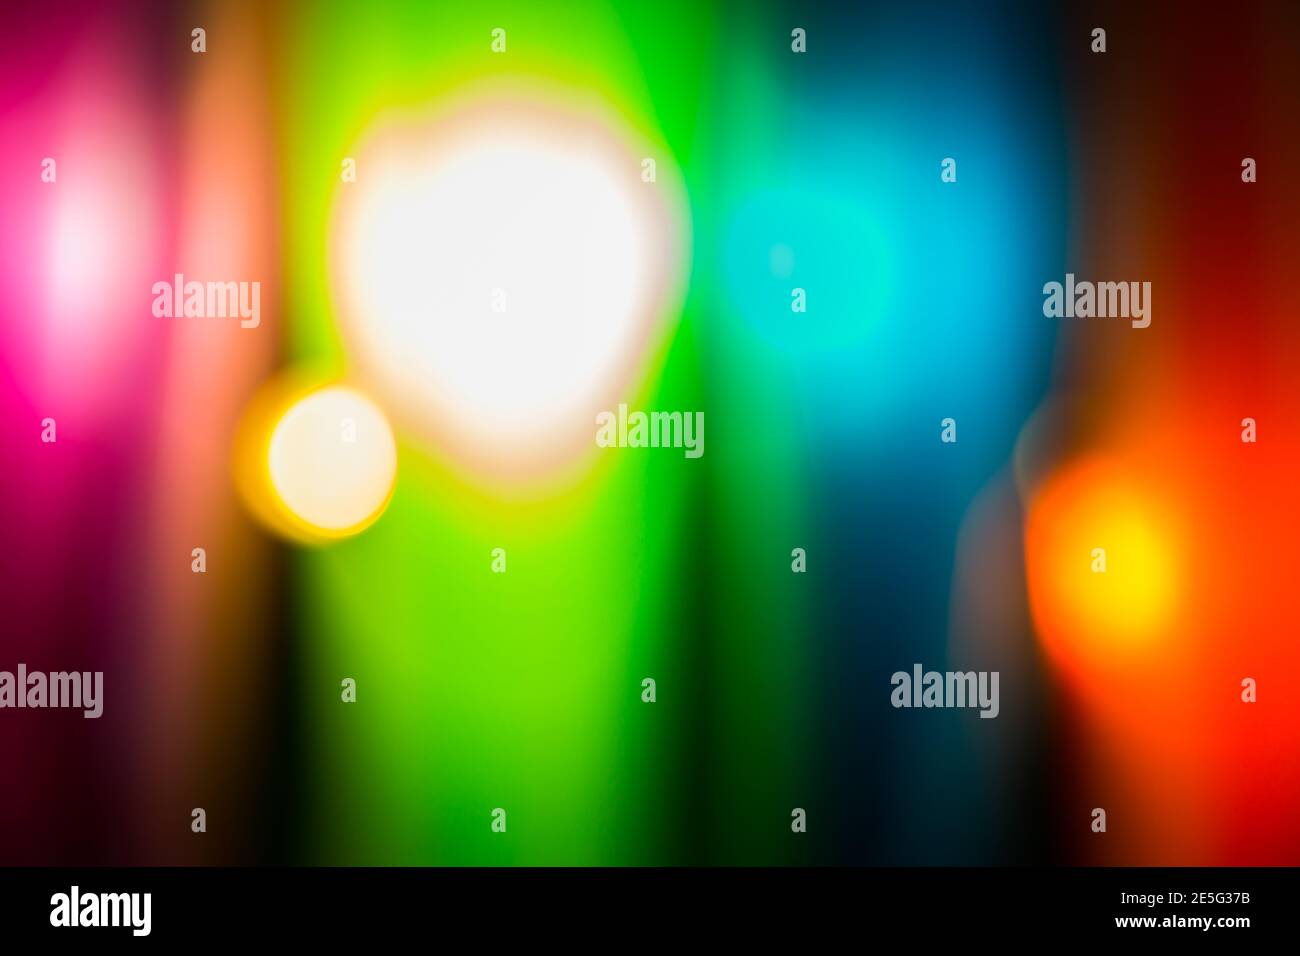 Colorful Soft lights background Stock Photo